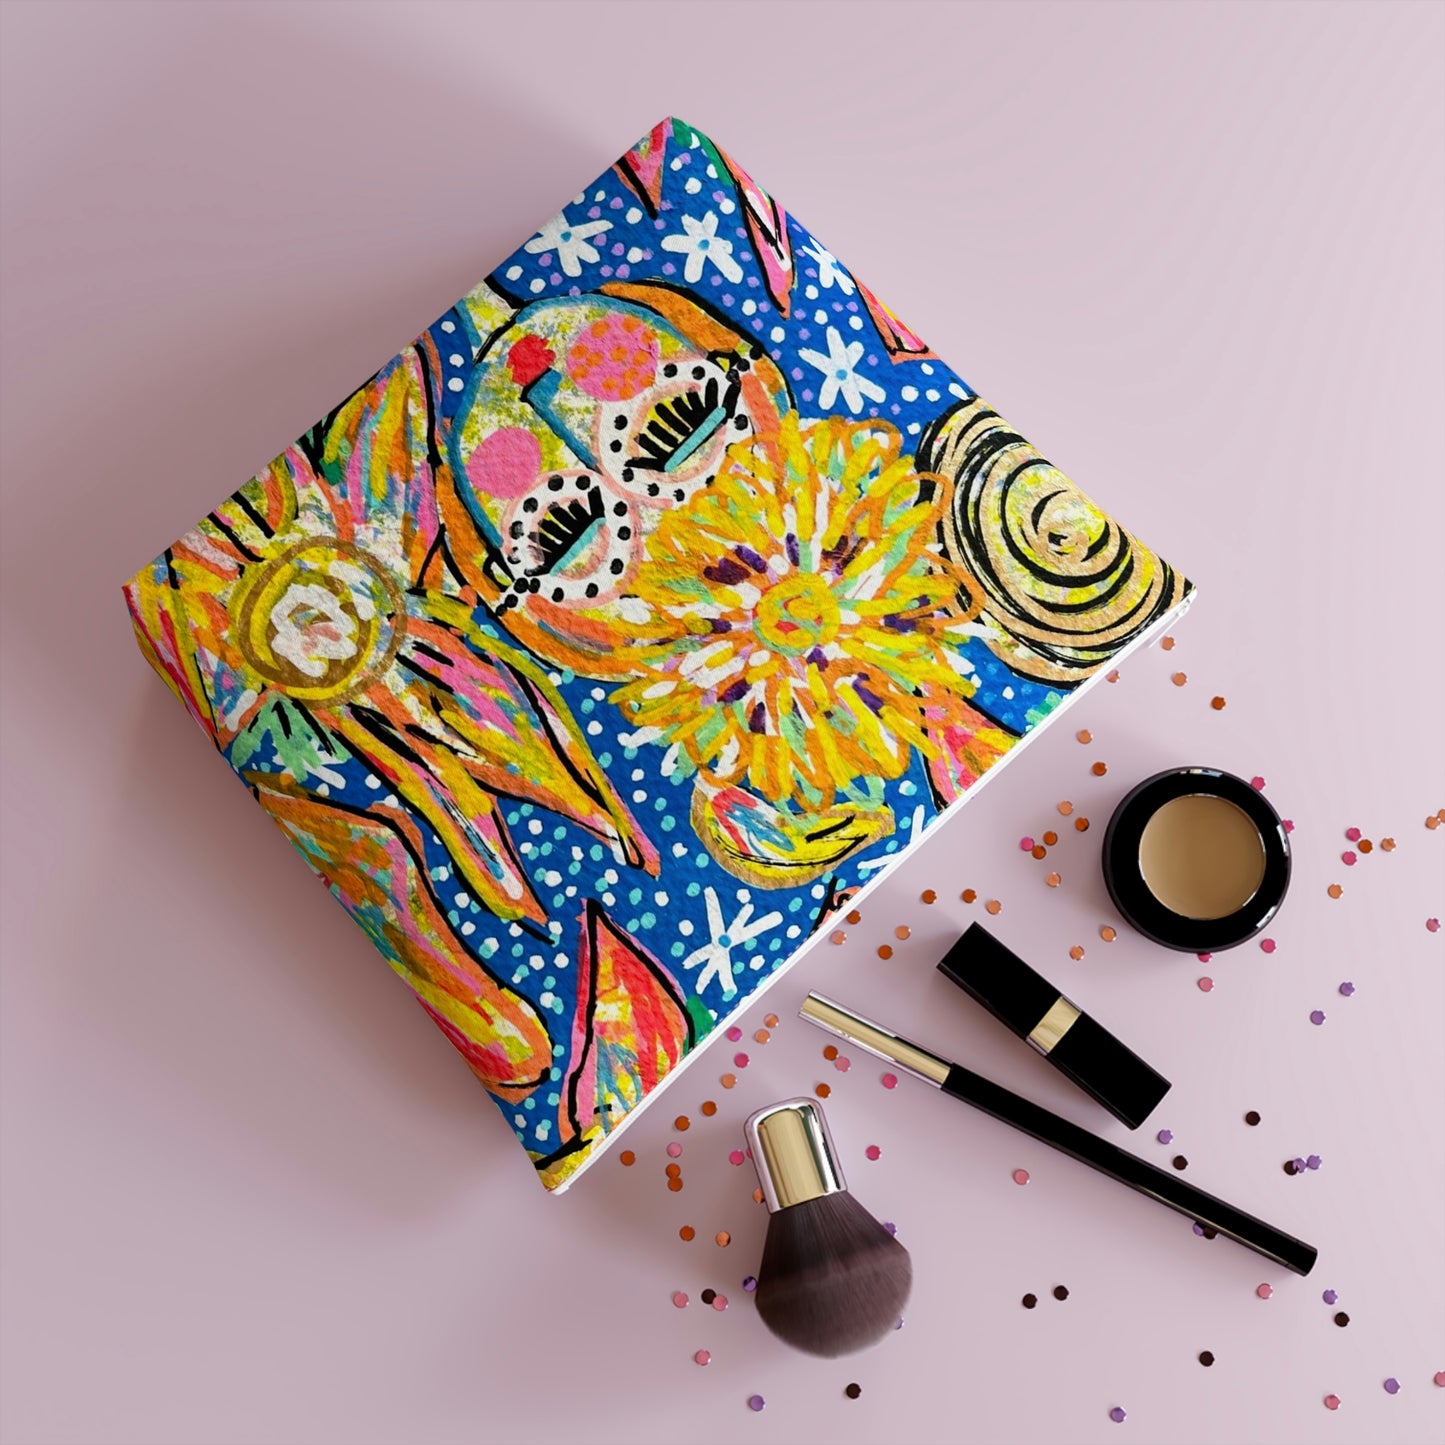 "MAY ALL YOUR DREAMS COME TRUE" Cotton Cosmetic Bag